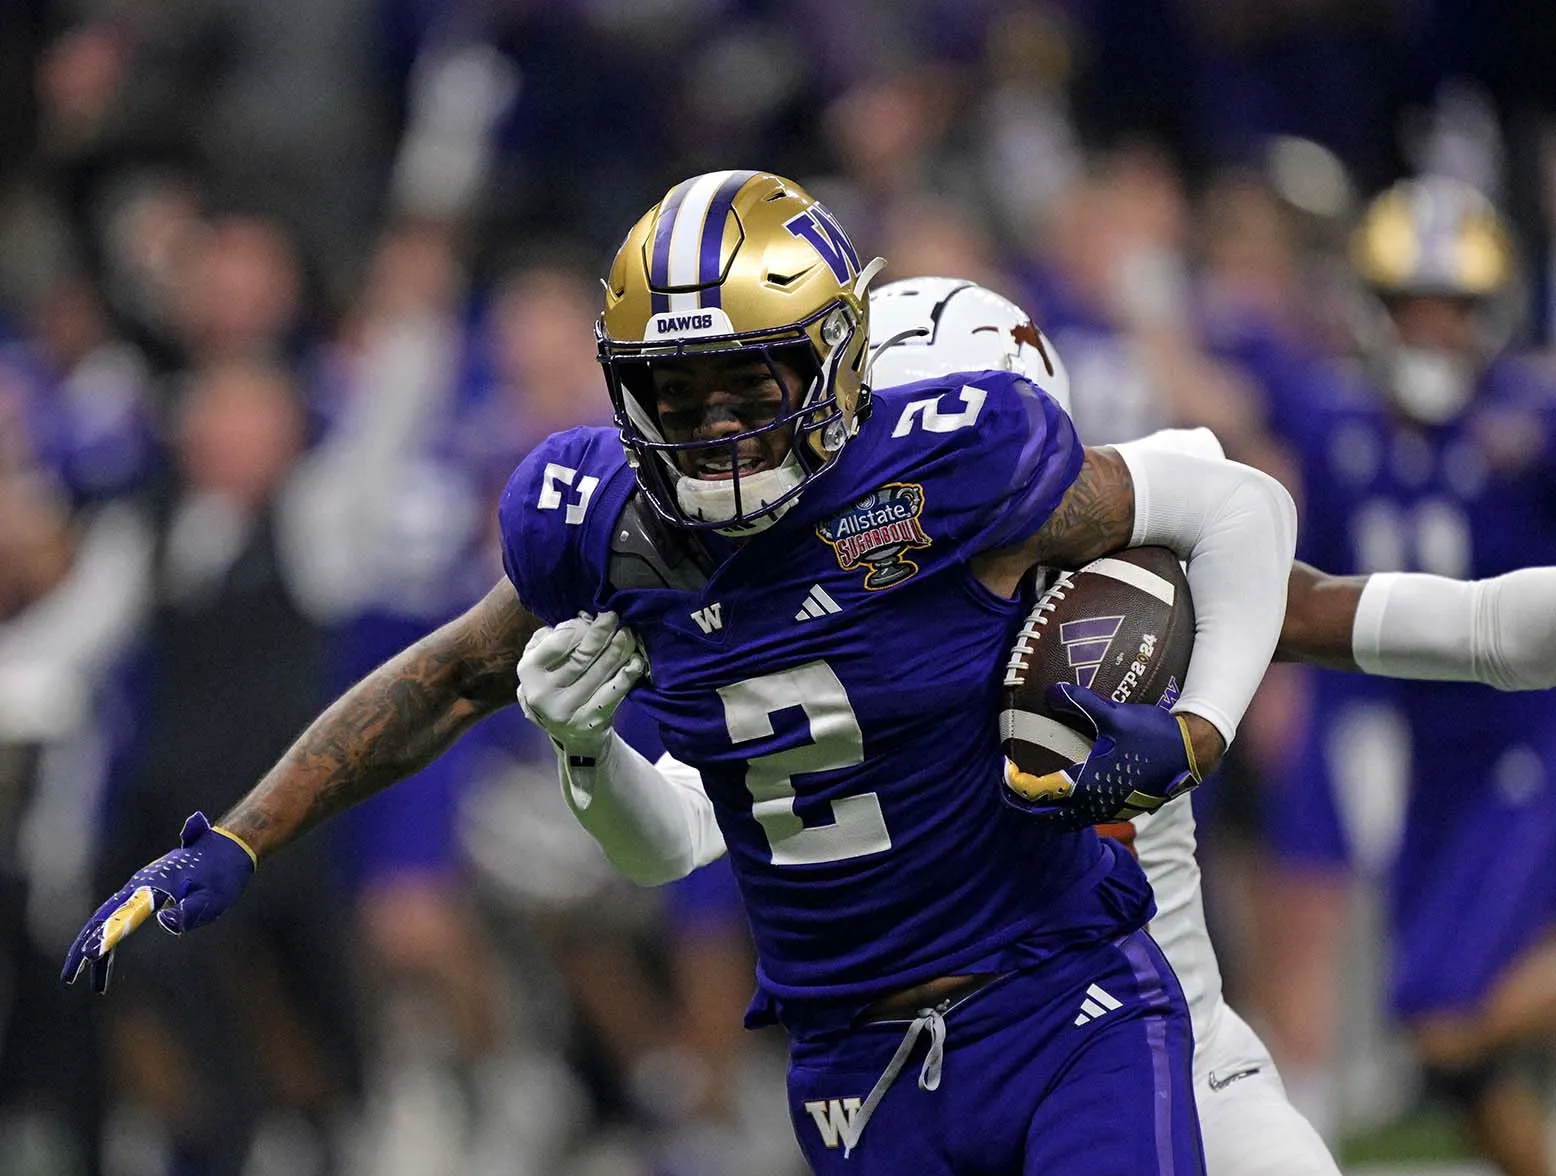 Jan 1, 2024; New Orleans, LA, USA; Washington Huskies wide receiver Ja'Lynn Polk (2) runs the ball after a catch against Texas Longhorns defensive back Terrance Brooks (8) during the first quarter in the 2024 Sugar Bowl college football playoff semifinal game at Caesars Superdome. Mandatory Credit: Matthew Hinton-USA TODAY Sports